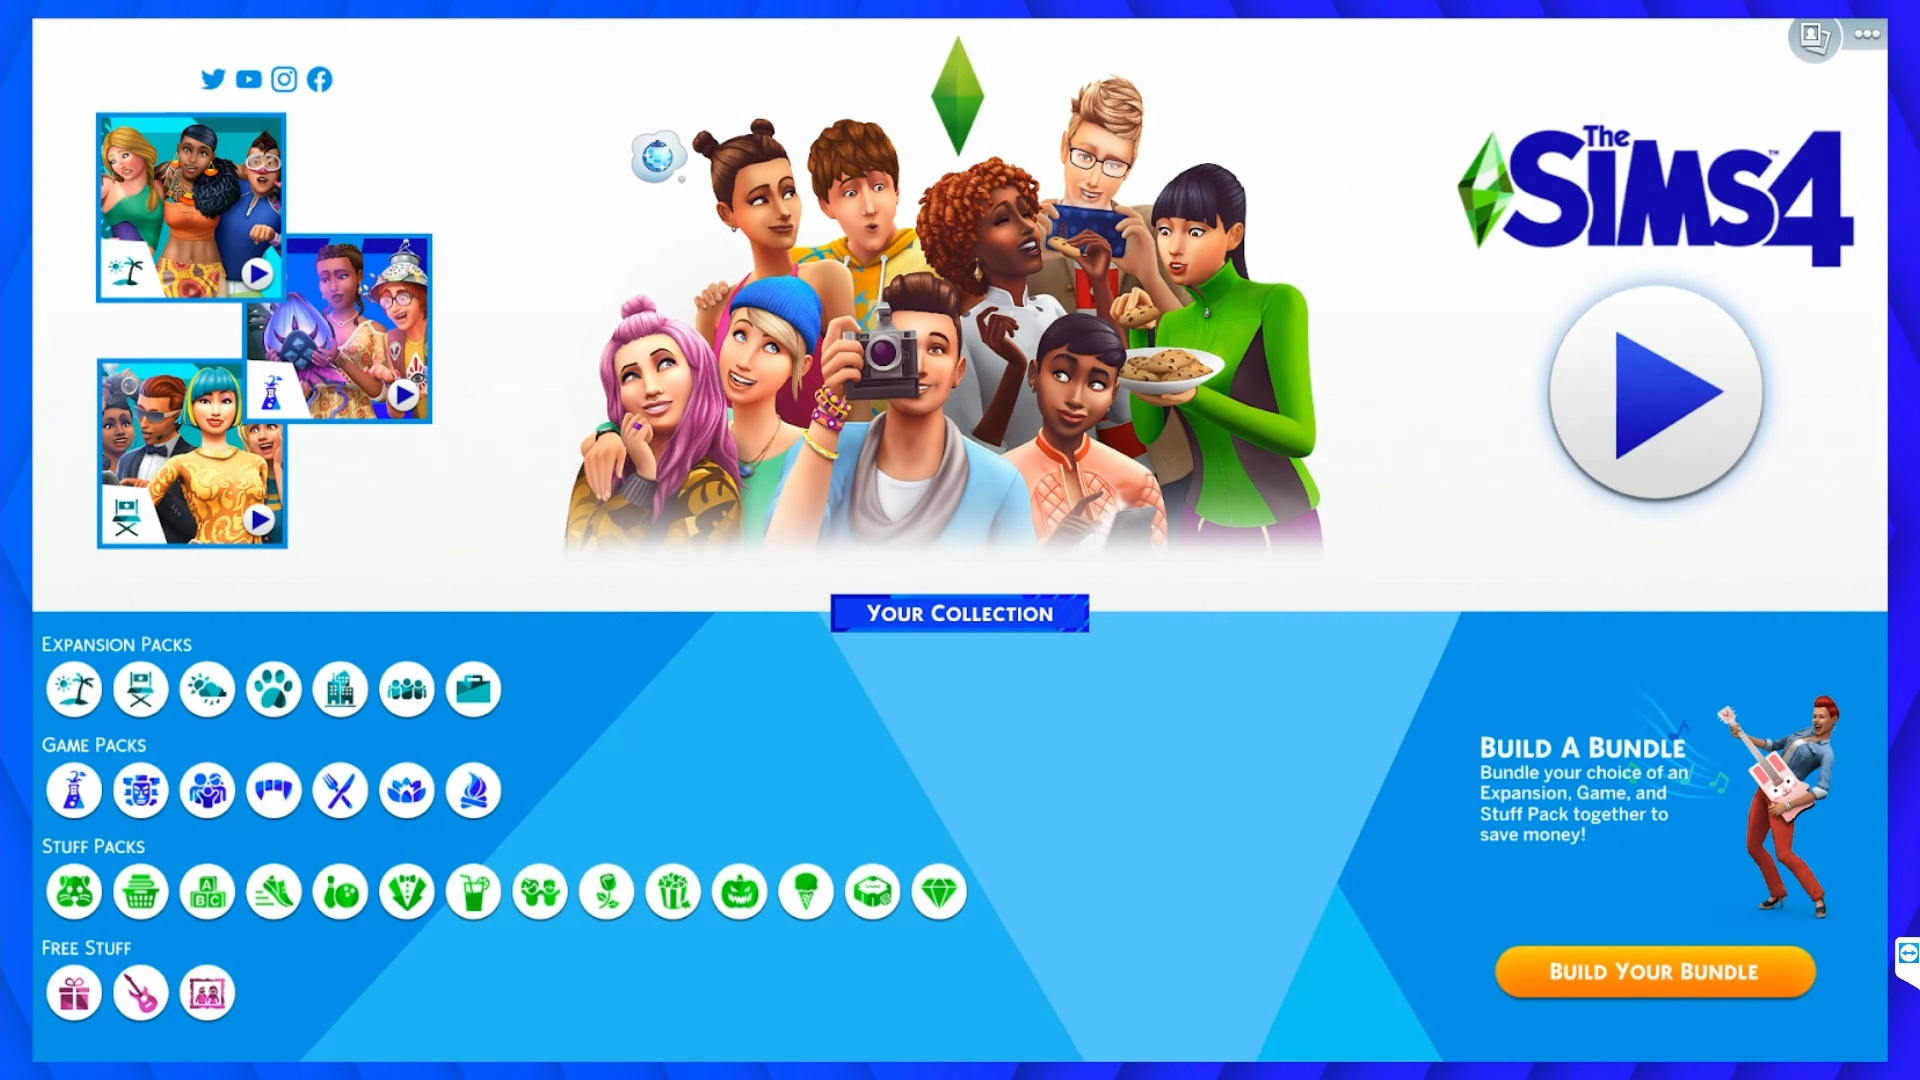 how to get free sims 3 expansion packs